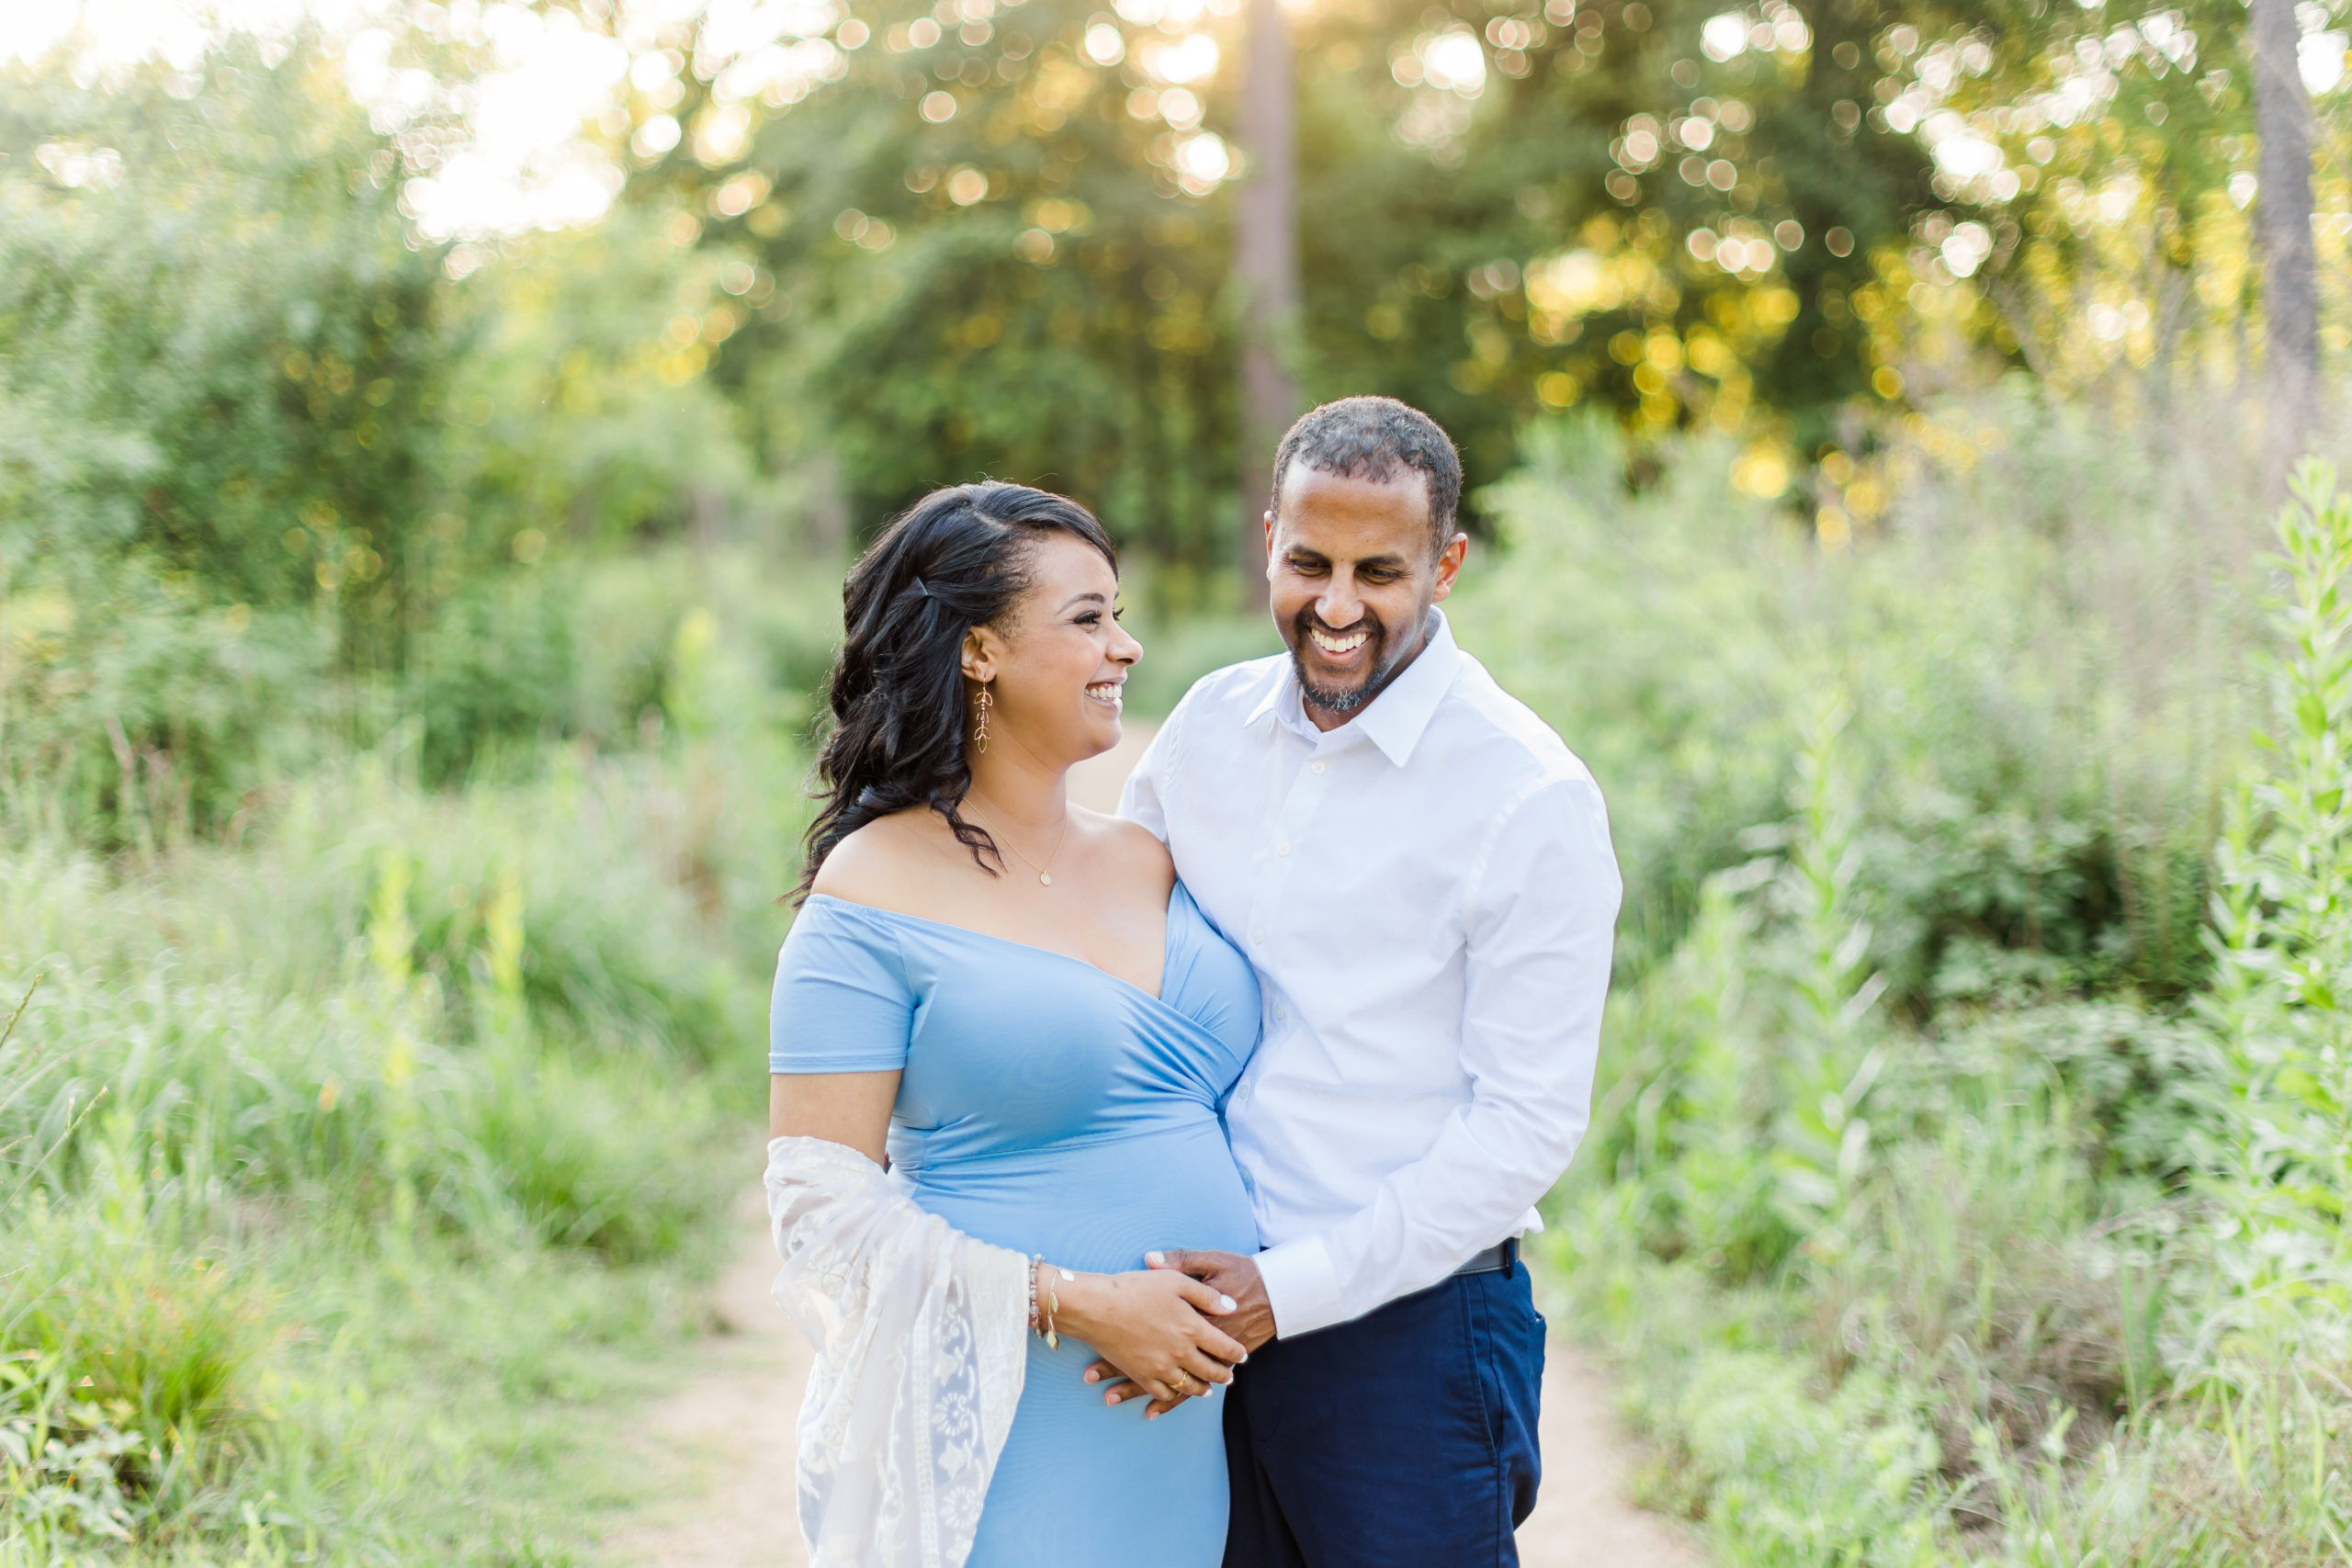 During this maternity session in Houston Heights, Texas, Monette Anne Photography captures this expectant couple posing happily together. expectant father holding wife's stomach baby bump fitted blue off the shoulder womens maternity dress white lace womens shawl gold womens jewelry #HoustonArboretumandNatureCenter #HoustonTexasMaternityPhotographer #HoustonTexasCouplesPhotographer #HoustonHeightsMaternityPhotographer #HoustonHeightsCouplesPhotographer #TexasGalleriaPhotographer #MaternityPhotos #BrightAndAiryPhotography #MaternityDress #SummerMaternityPhotos